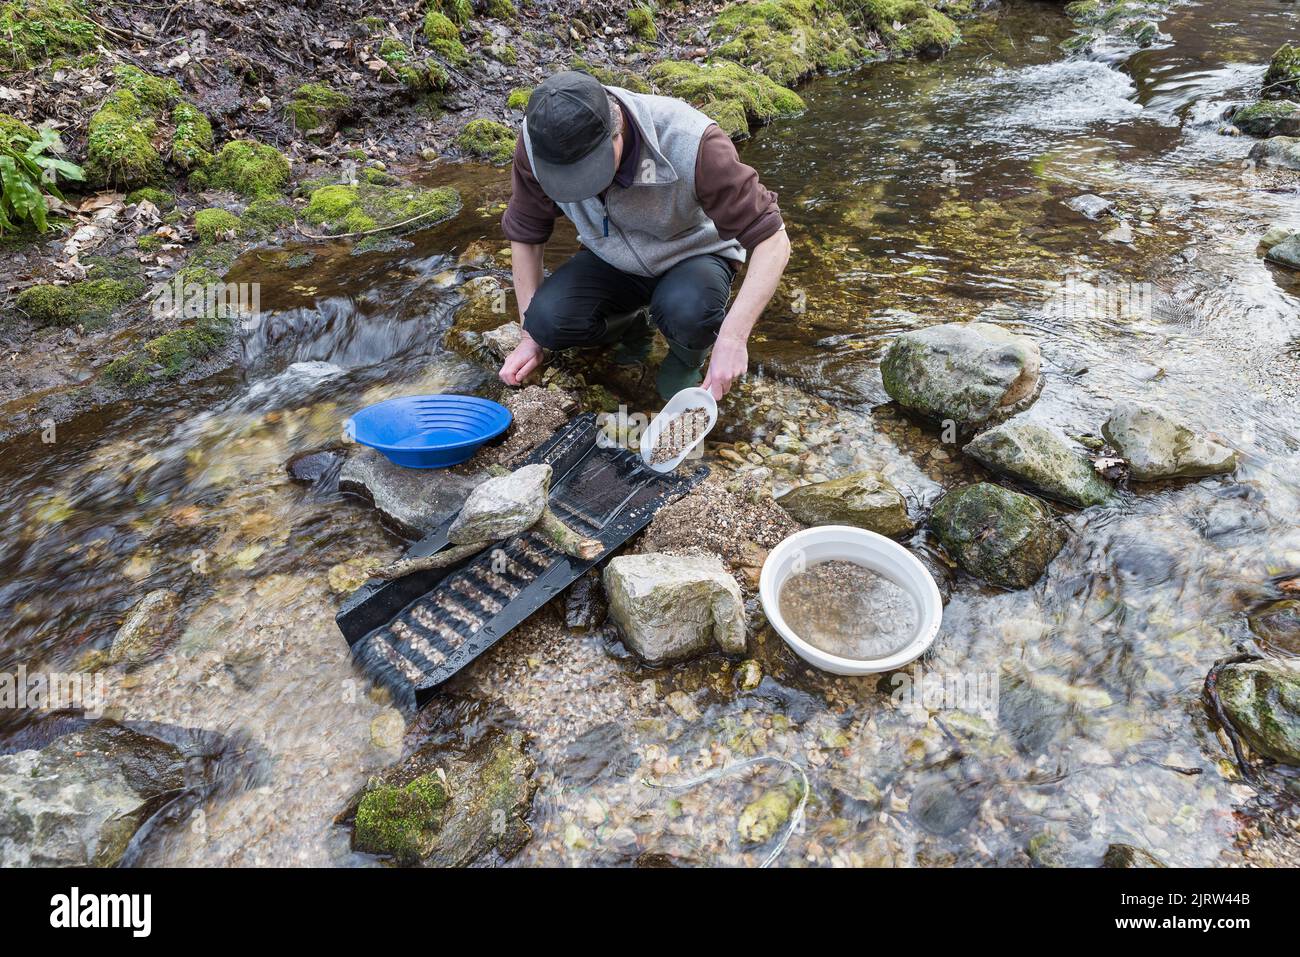 Outdoor adventures on river. Gold panning, man pours sand and gravel into a sluice box in search of gold in a small mountain stream Stock Photo